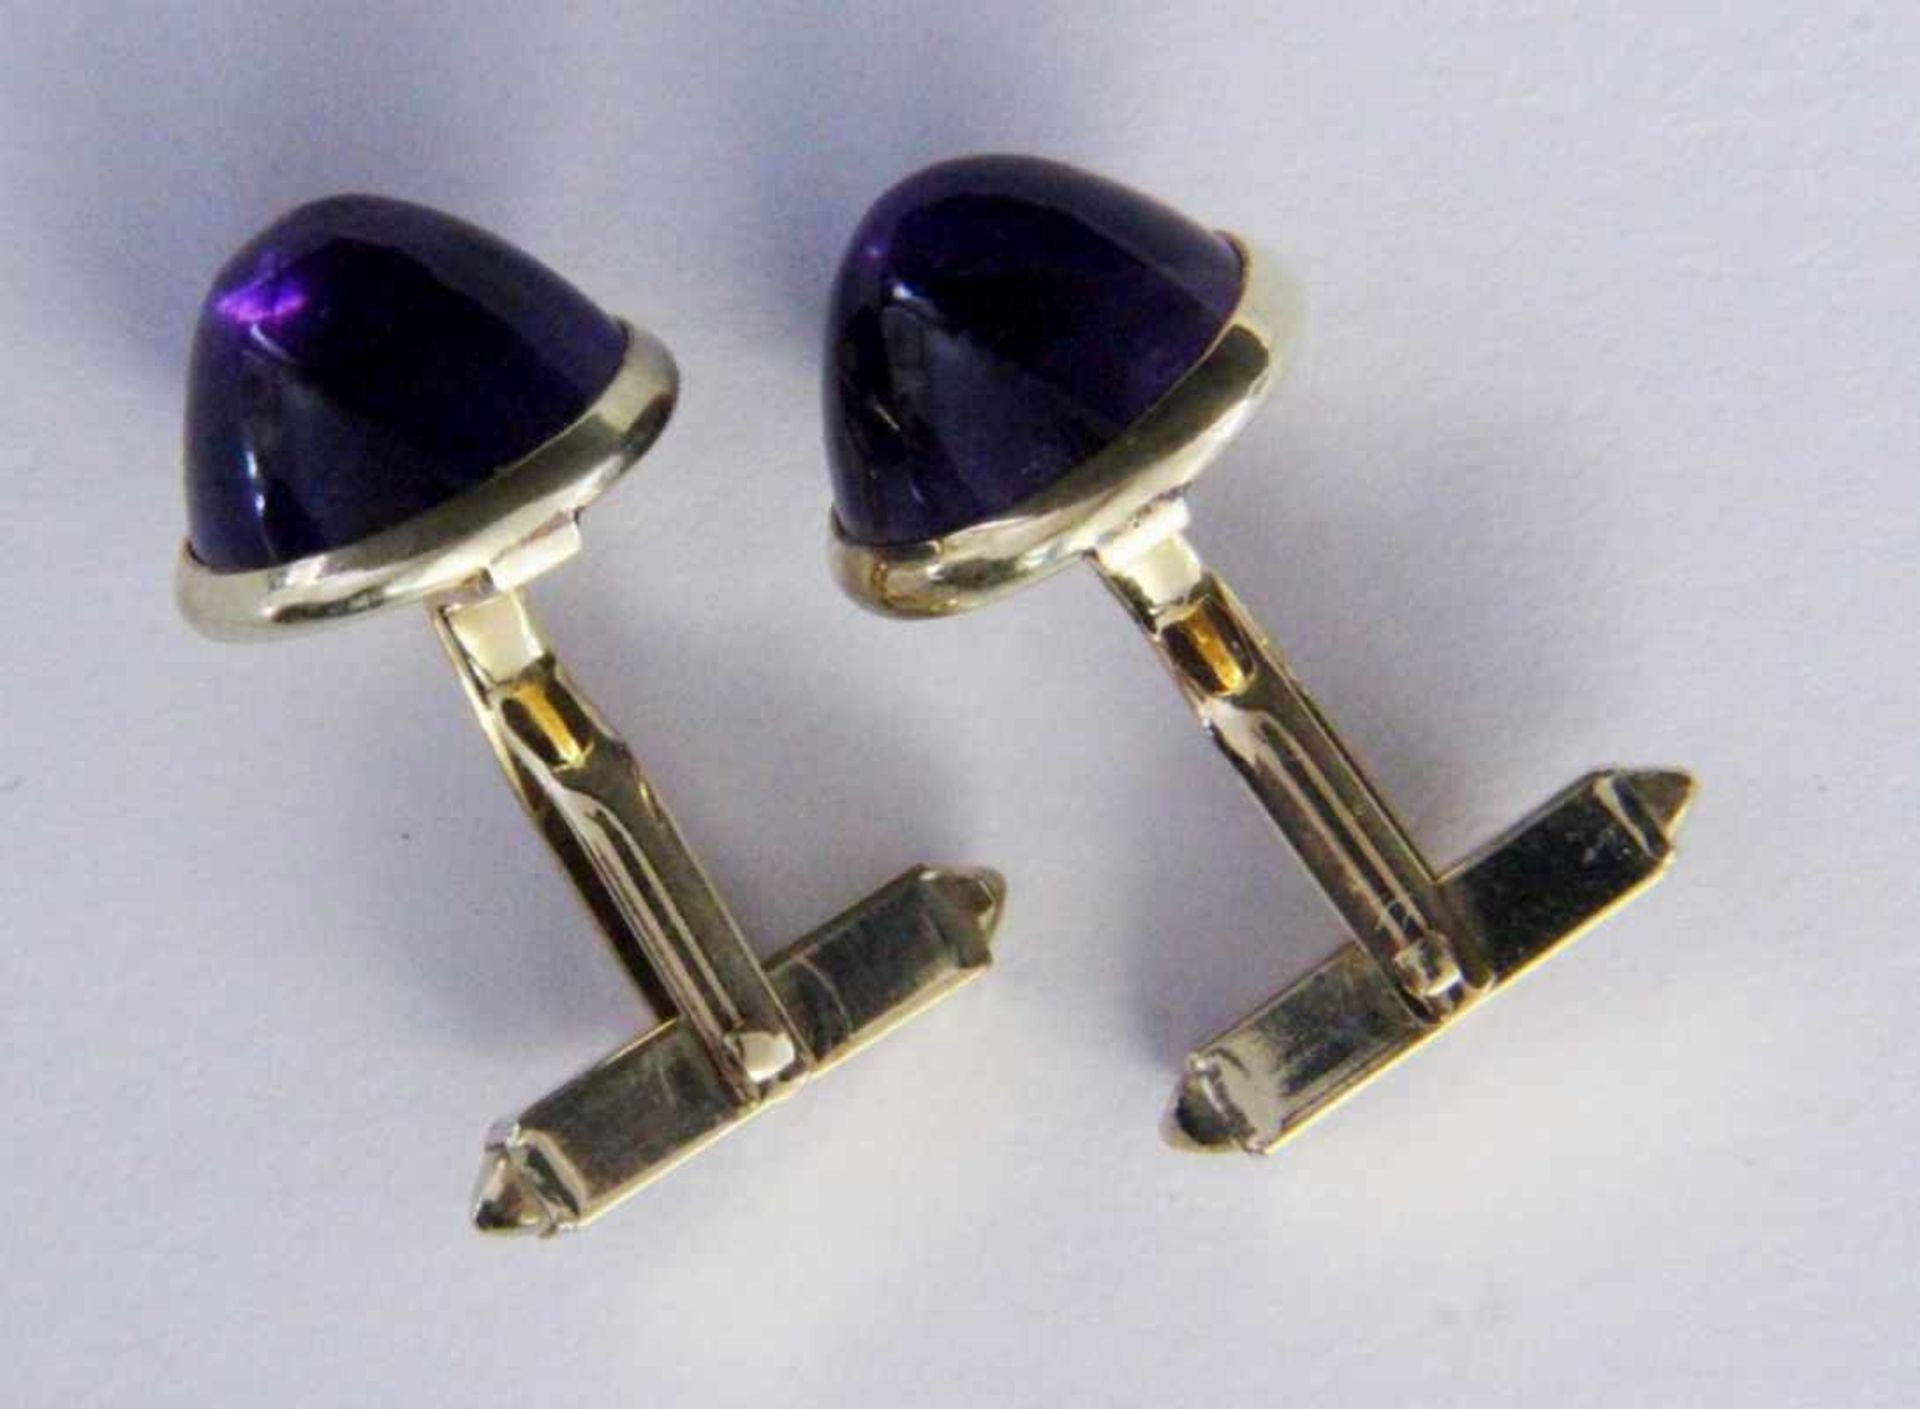 A PAIR OF CUFFLINKS 585/000 yellow gold with amethysts. Gross weight approximately 13.8gramsPAAR